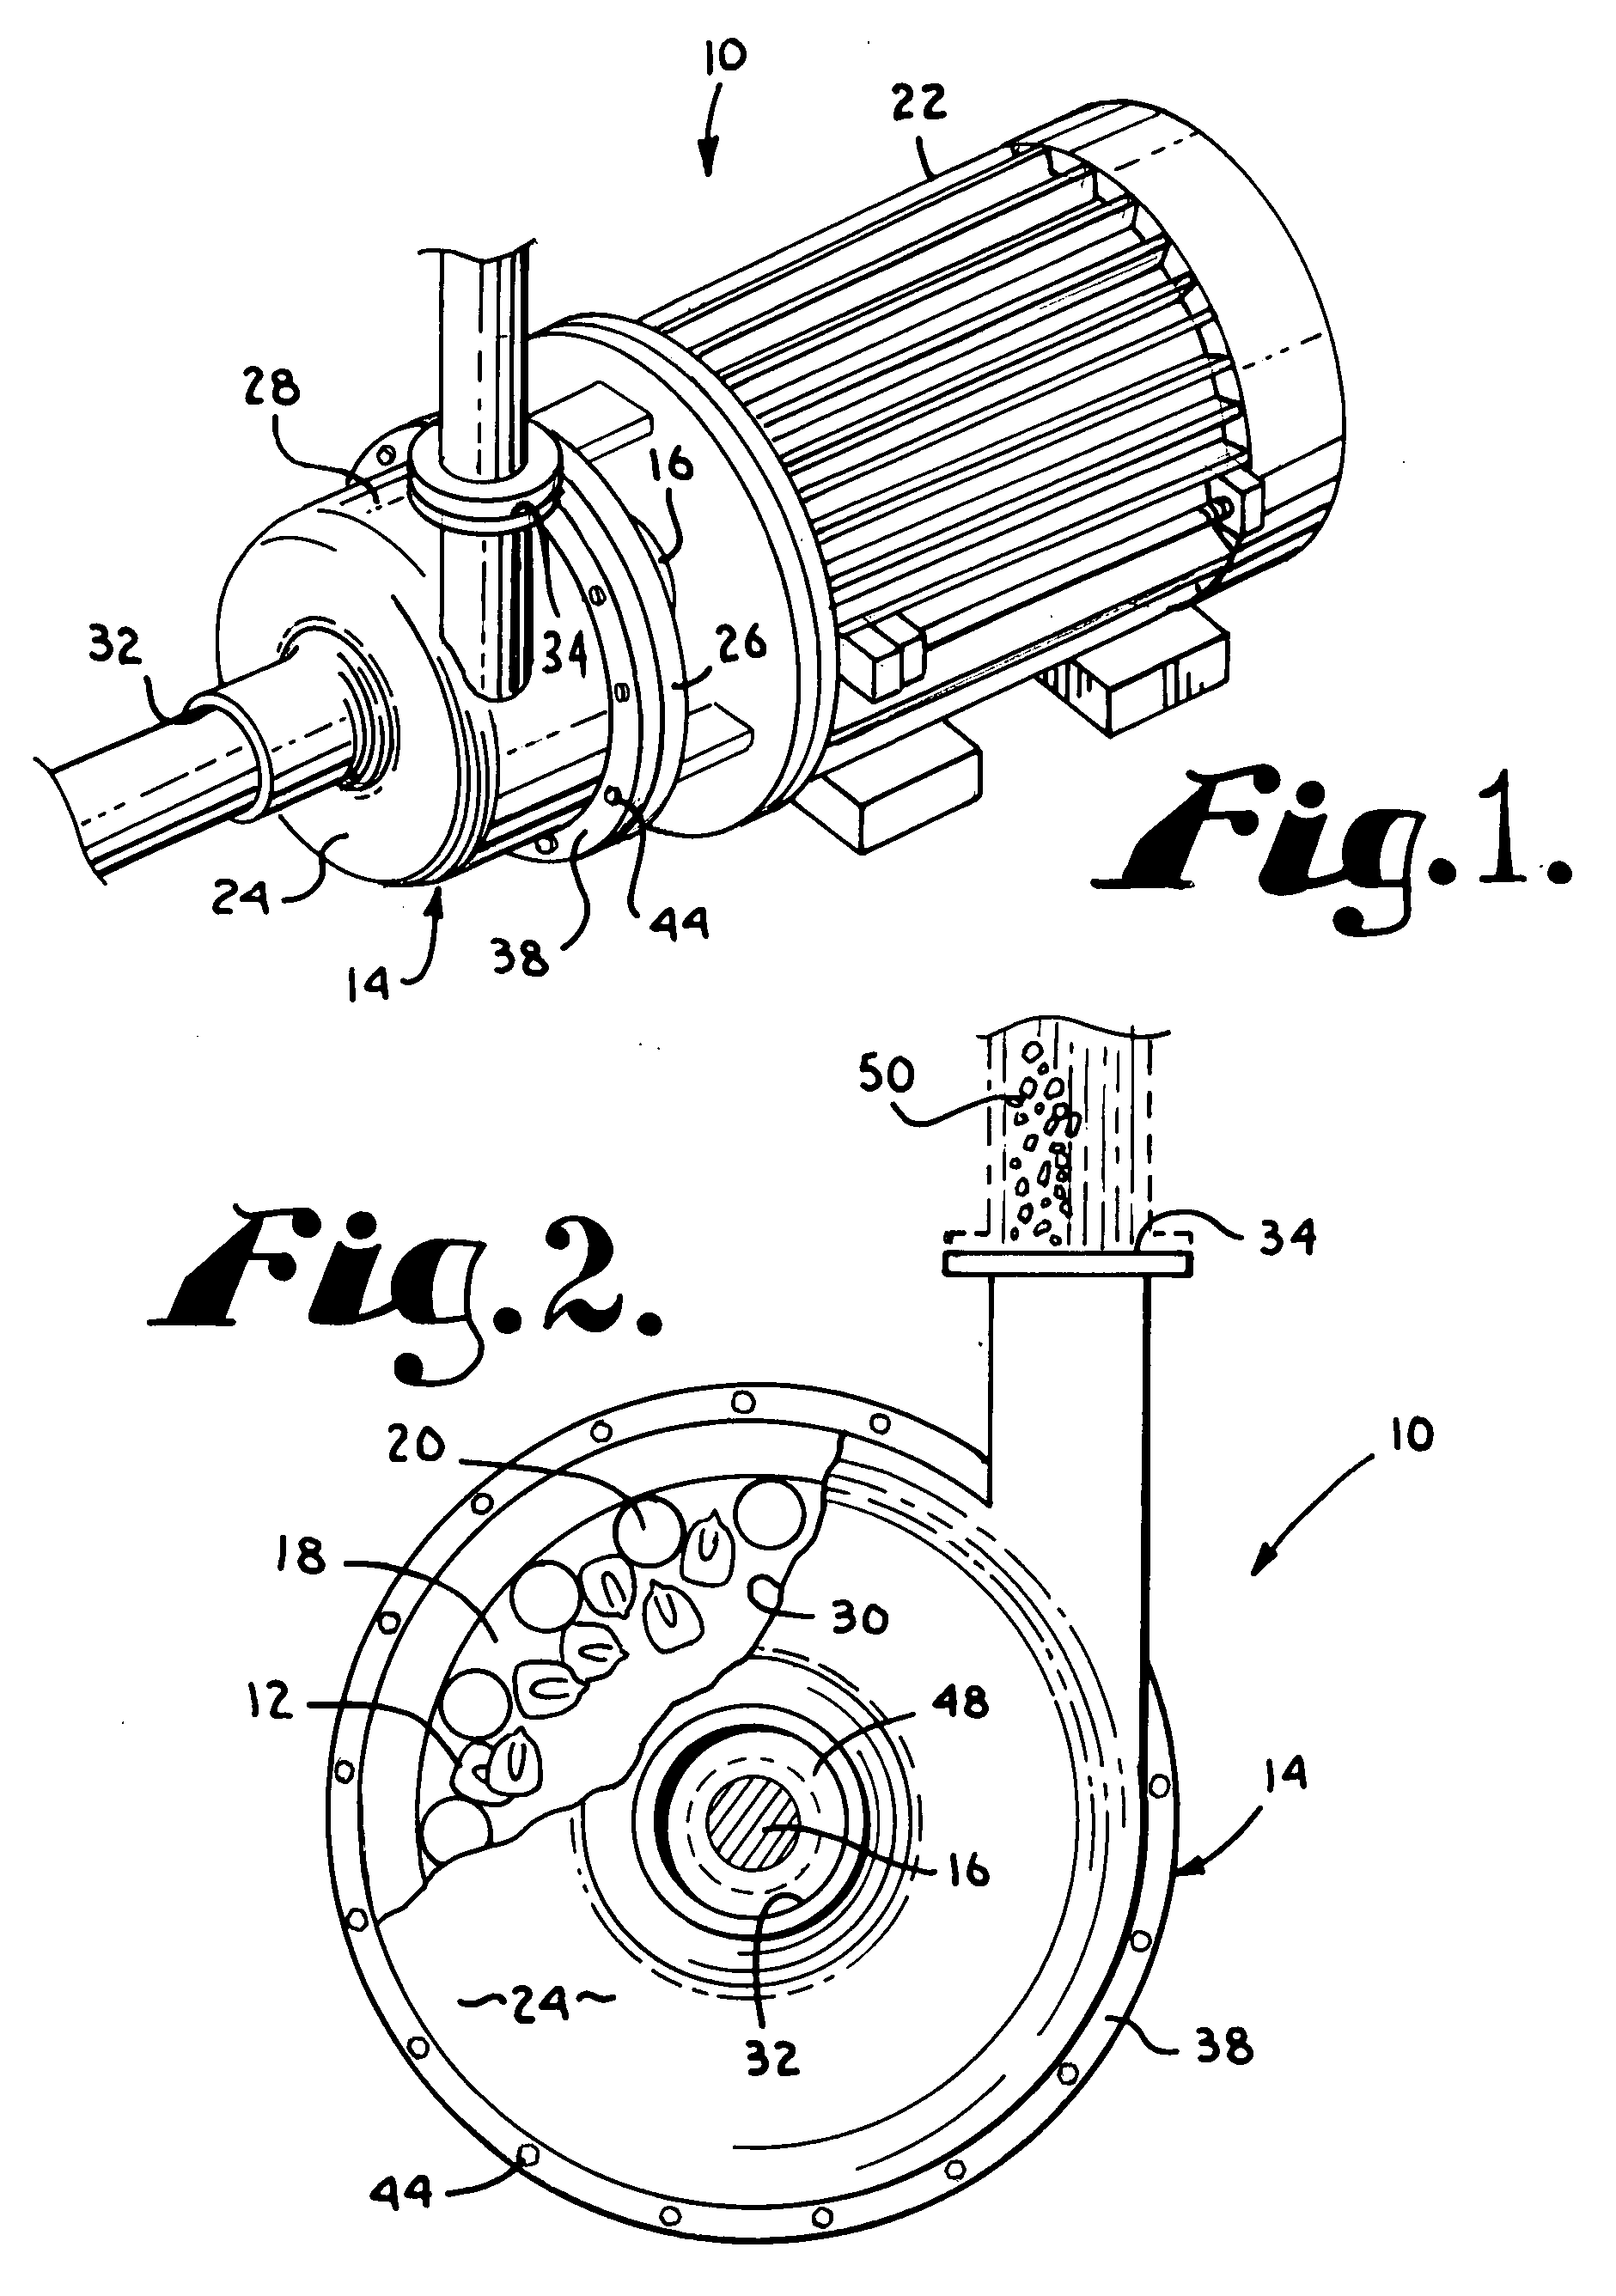 Method and apparatus for separating, purifying, promoting interaction and improving combustion